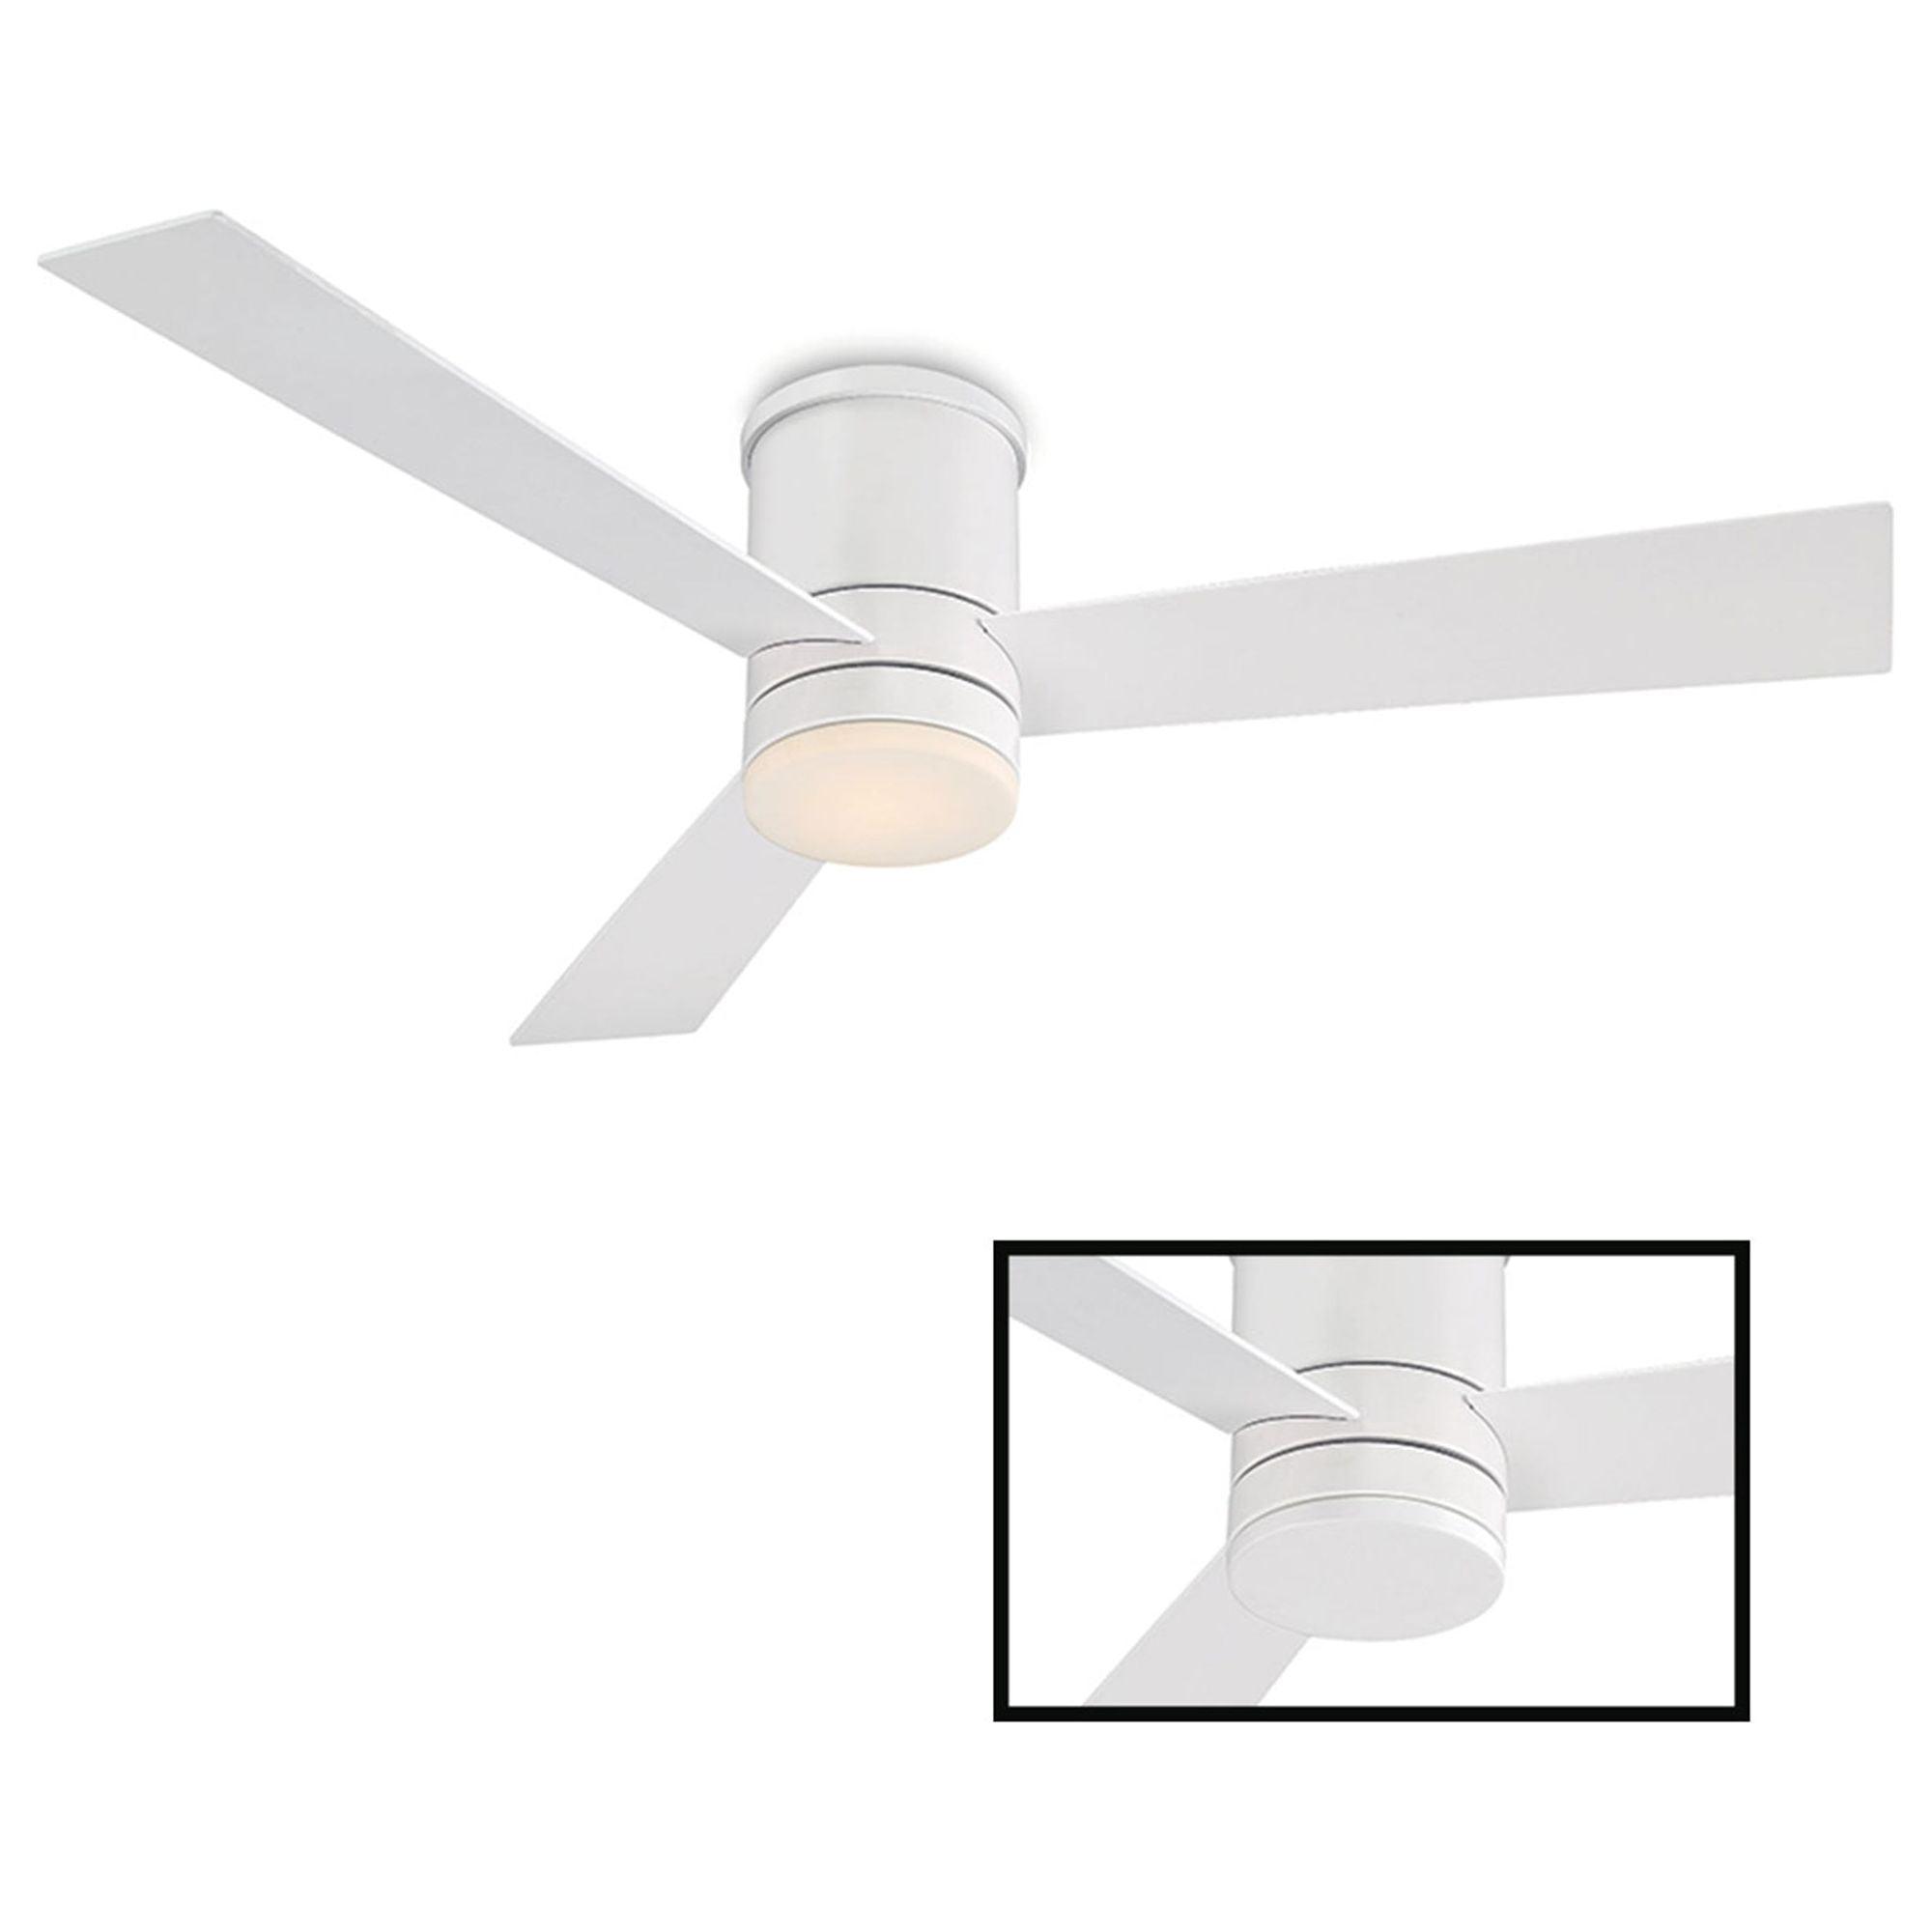 Modern Forms - Axis Indoor/Outdoor 3-Blade 52" Smart Flush Mount Ceiling Fan with LED Light Kit and Remote Control - Lights Canada